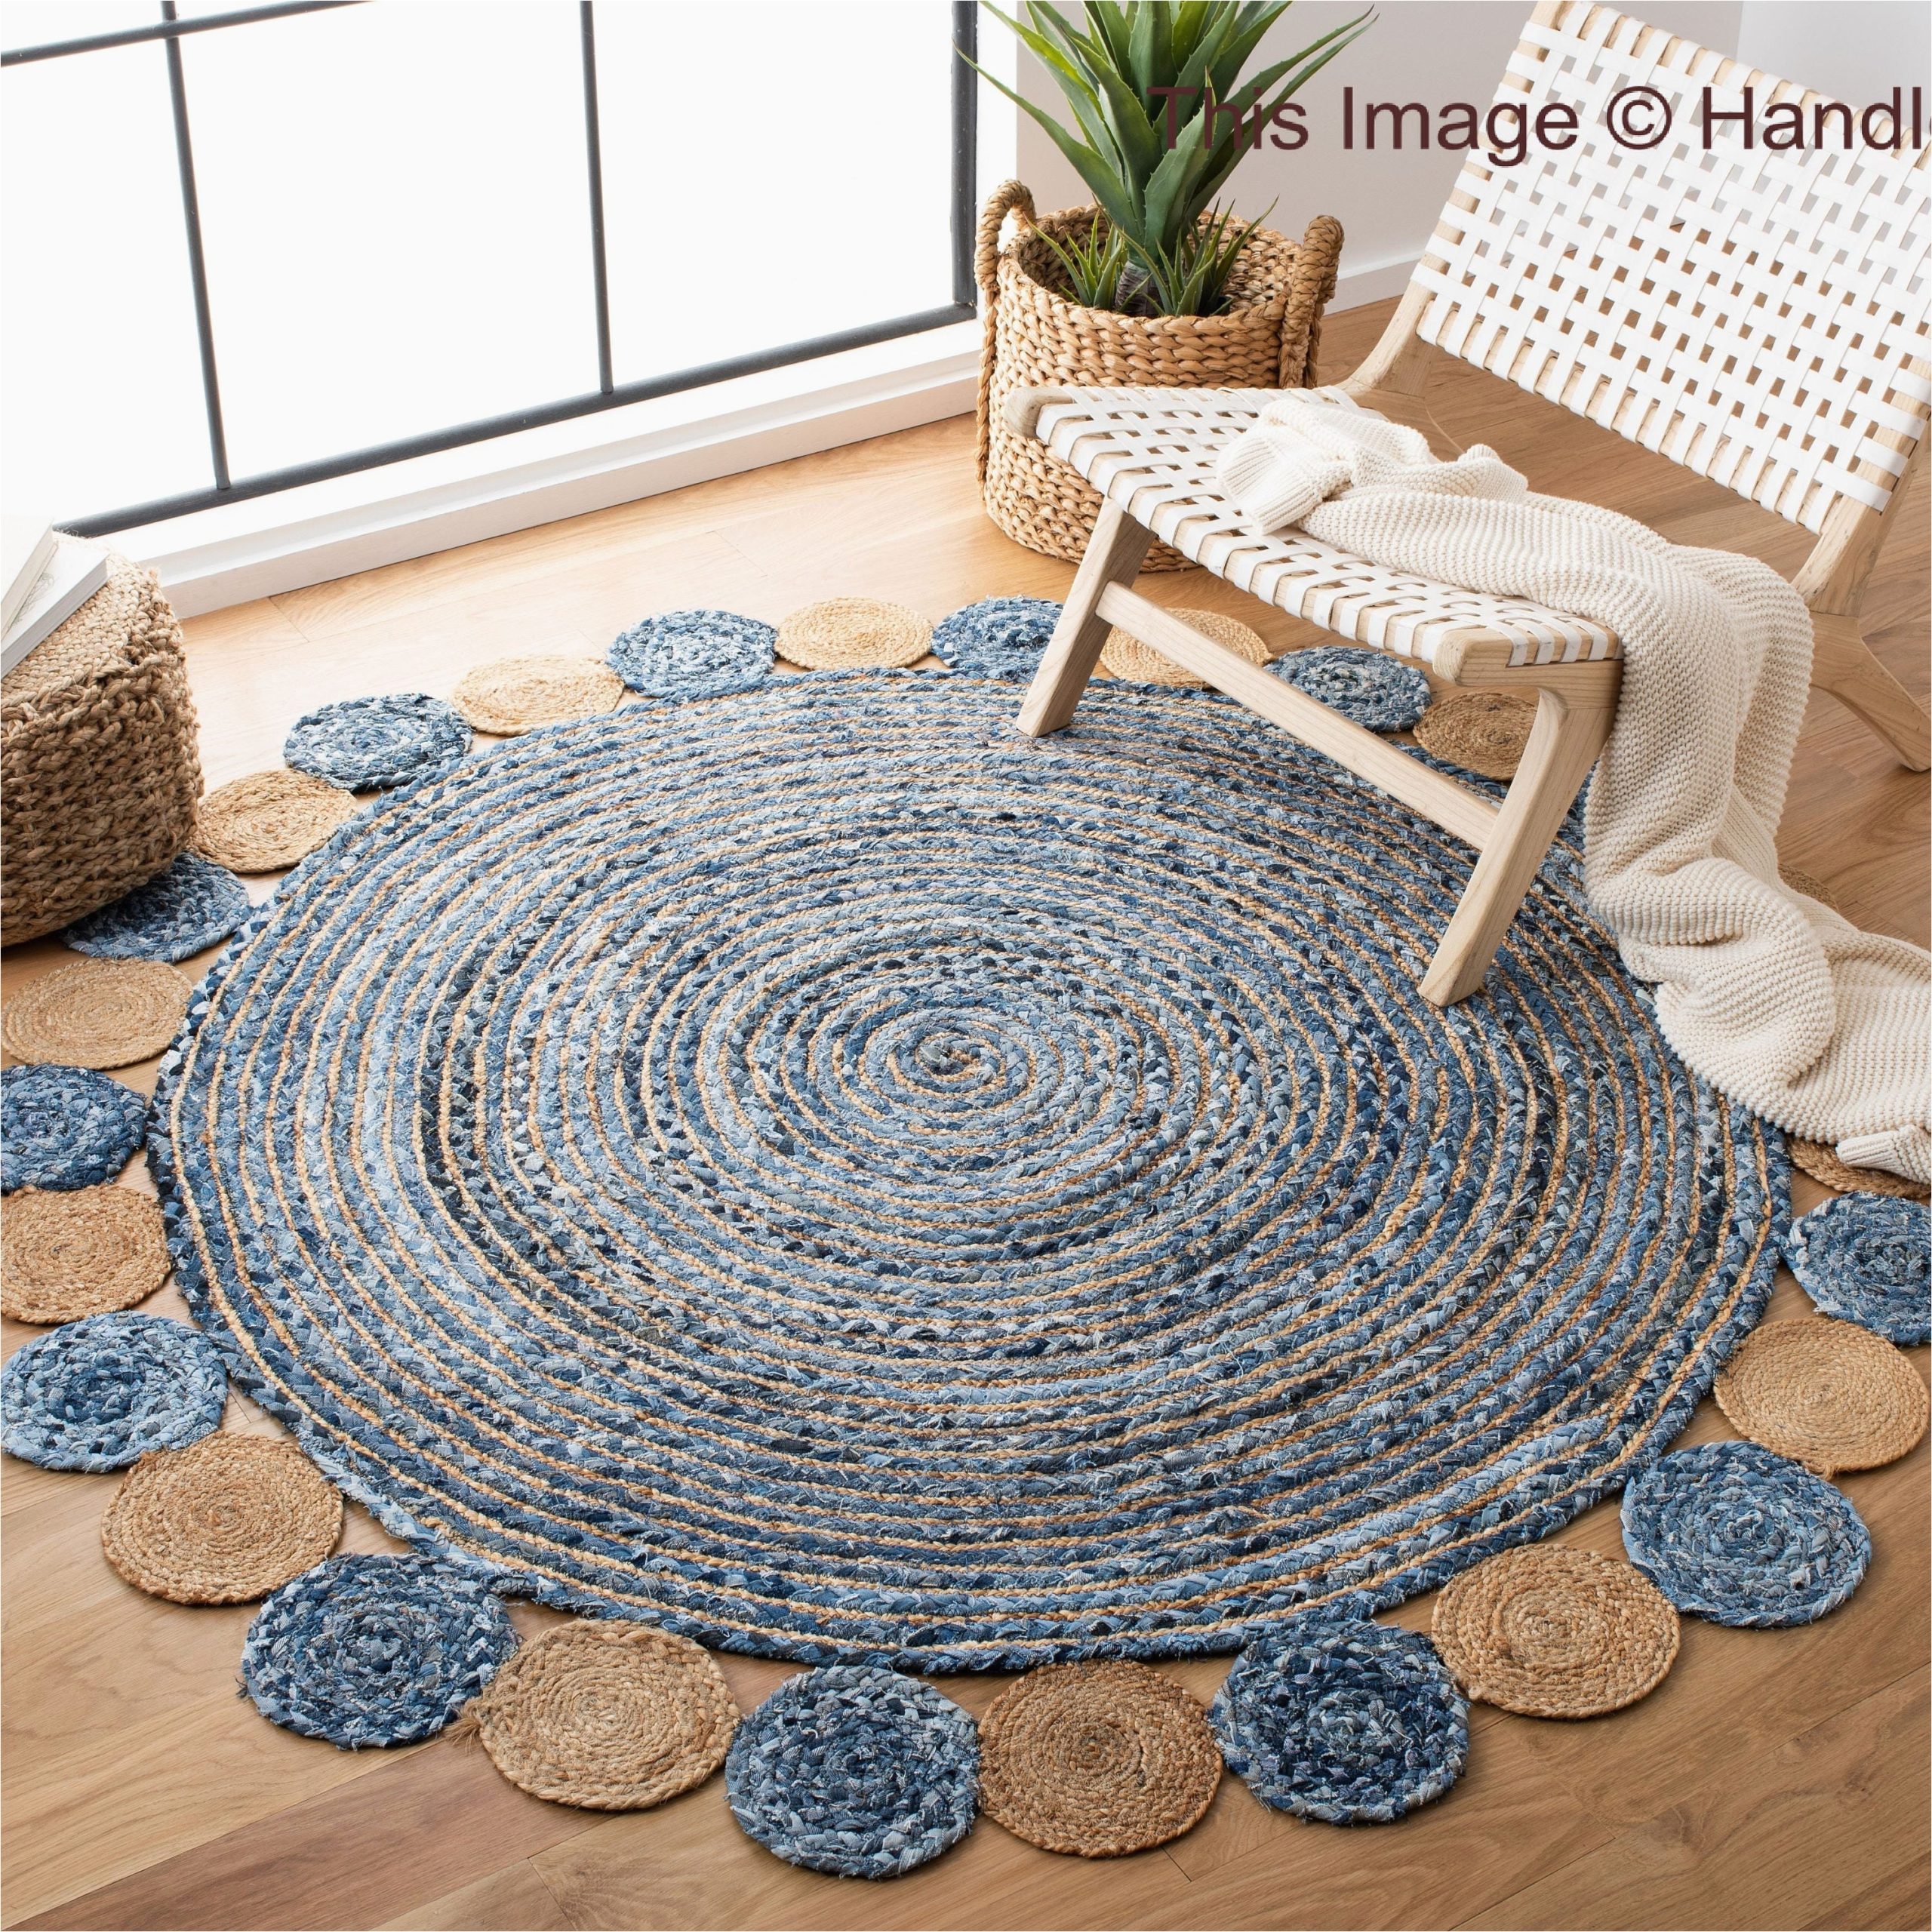 Large Round area Rugs for Sale Hand-braided 5 Feet Round area Rug for Living Room On Sale, Extra Large Reversible Bedroom area Rug 4 X 4 with Free Shipping